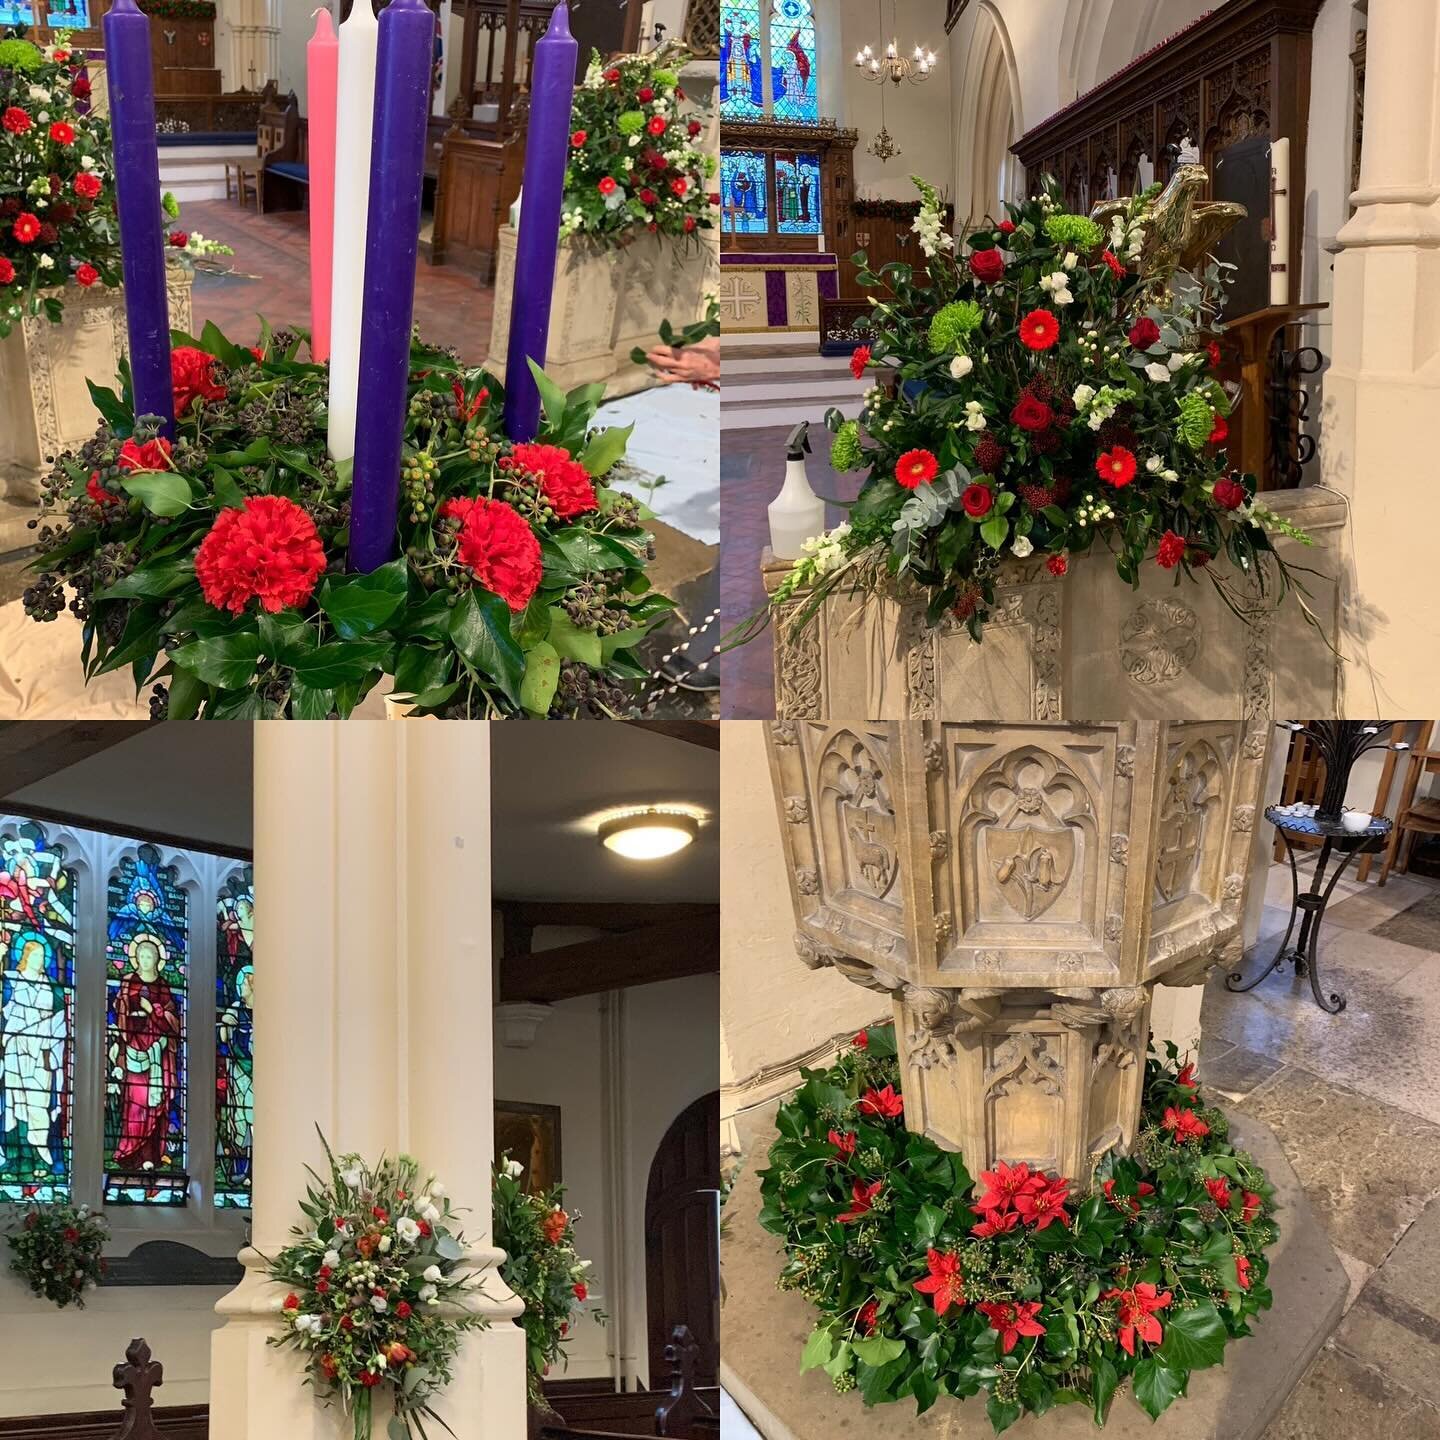 Festive flowers in church, come and enjoy the wonderful arrangements by our flower team #wimbledonvillage #churchflowers #festiveflowers